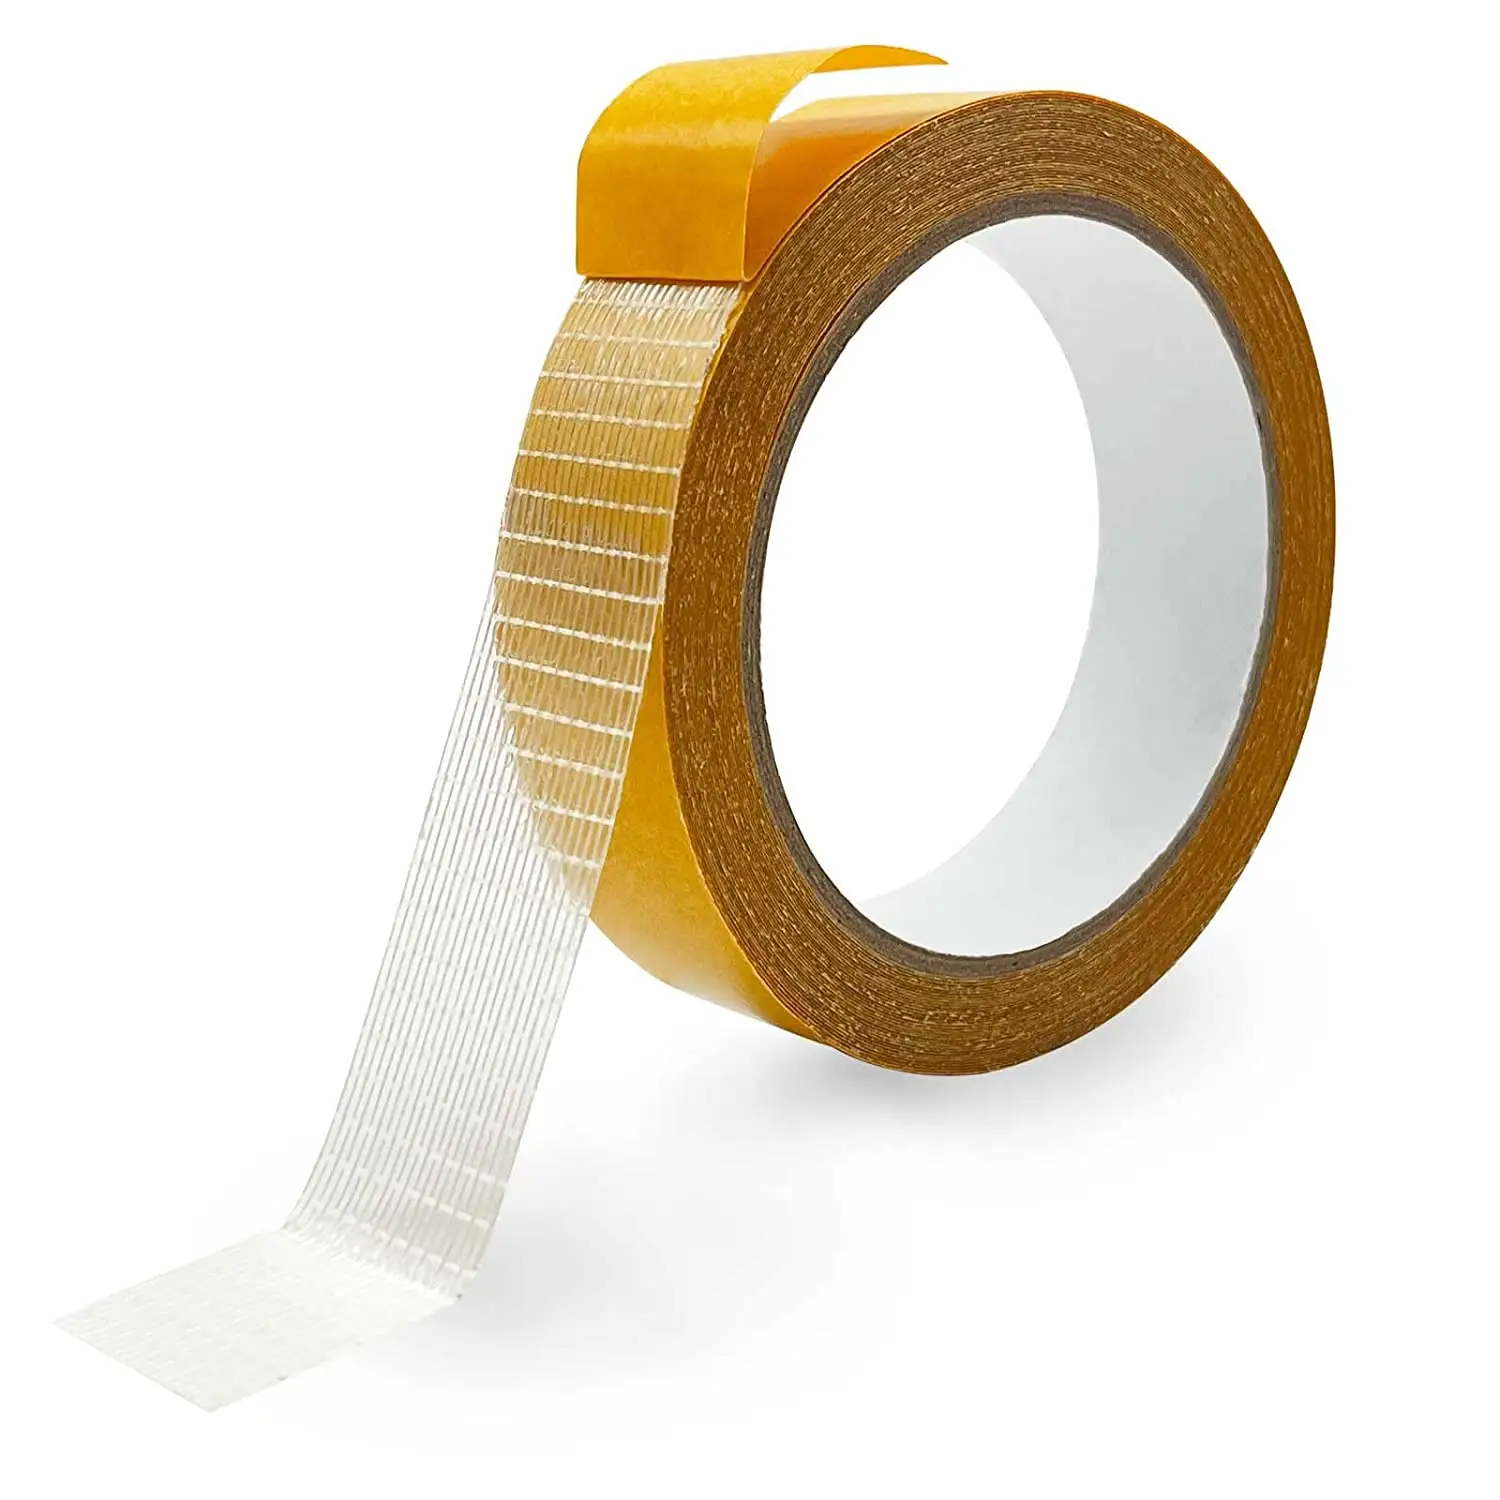 BP Floor Fabric Double-sided Adhesive Grid Tape Yellow High-adhesive Strong Carpet Tape For Wedding Party Exhibition